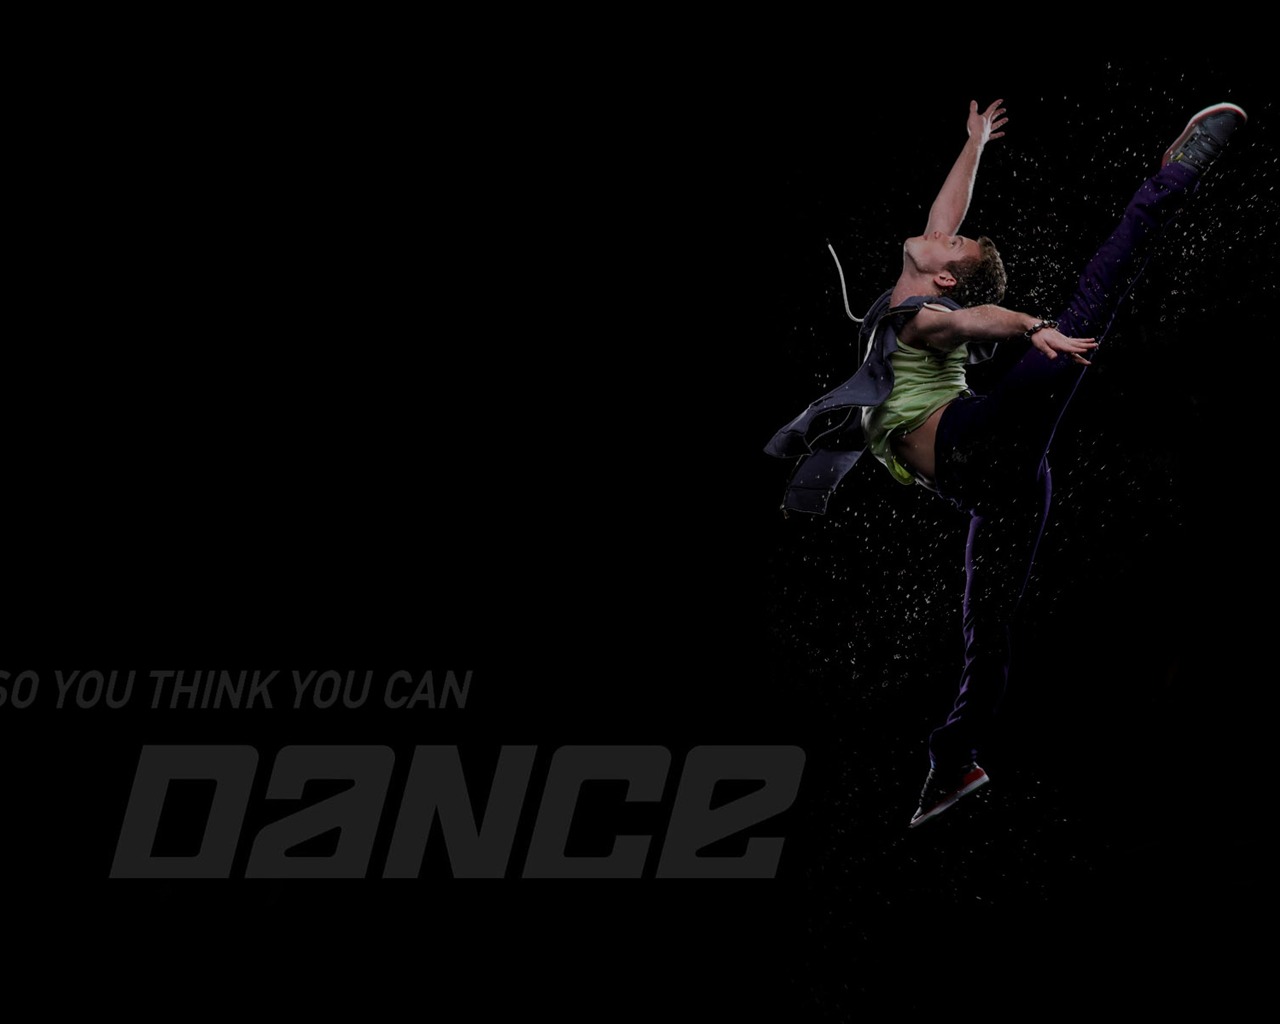 So You Think You Can Dance 舞林争霸 壁纸(二)8 - 1280x1024